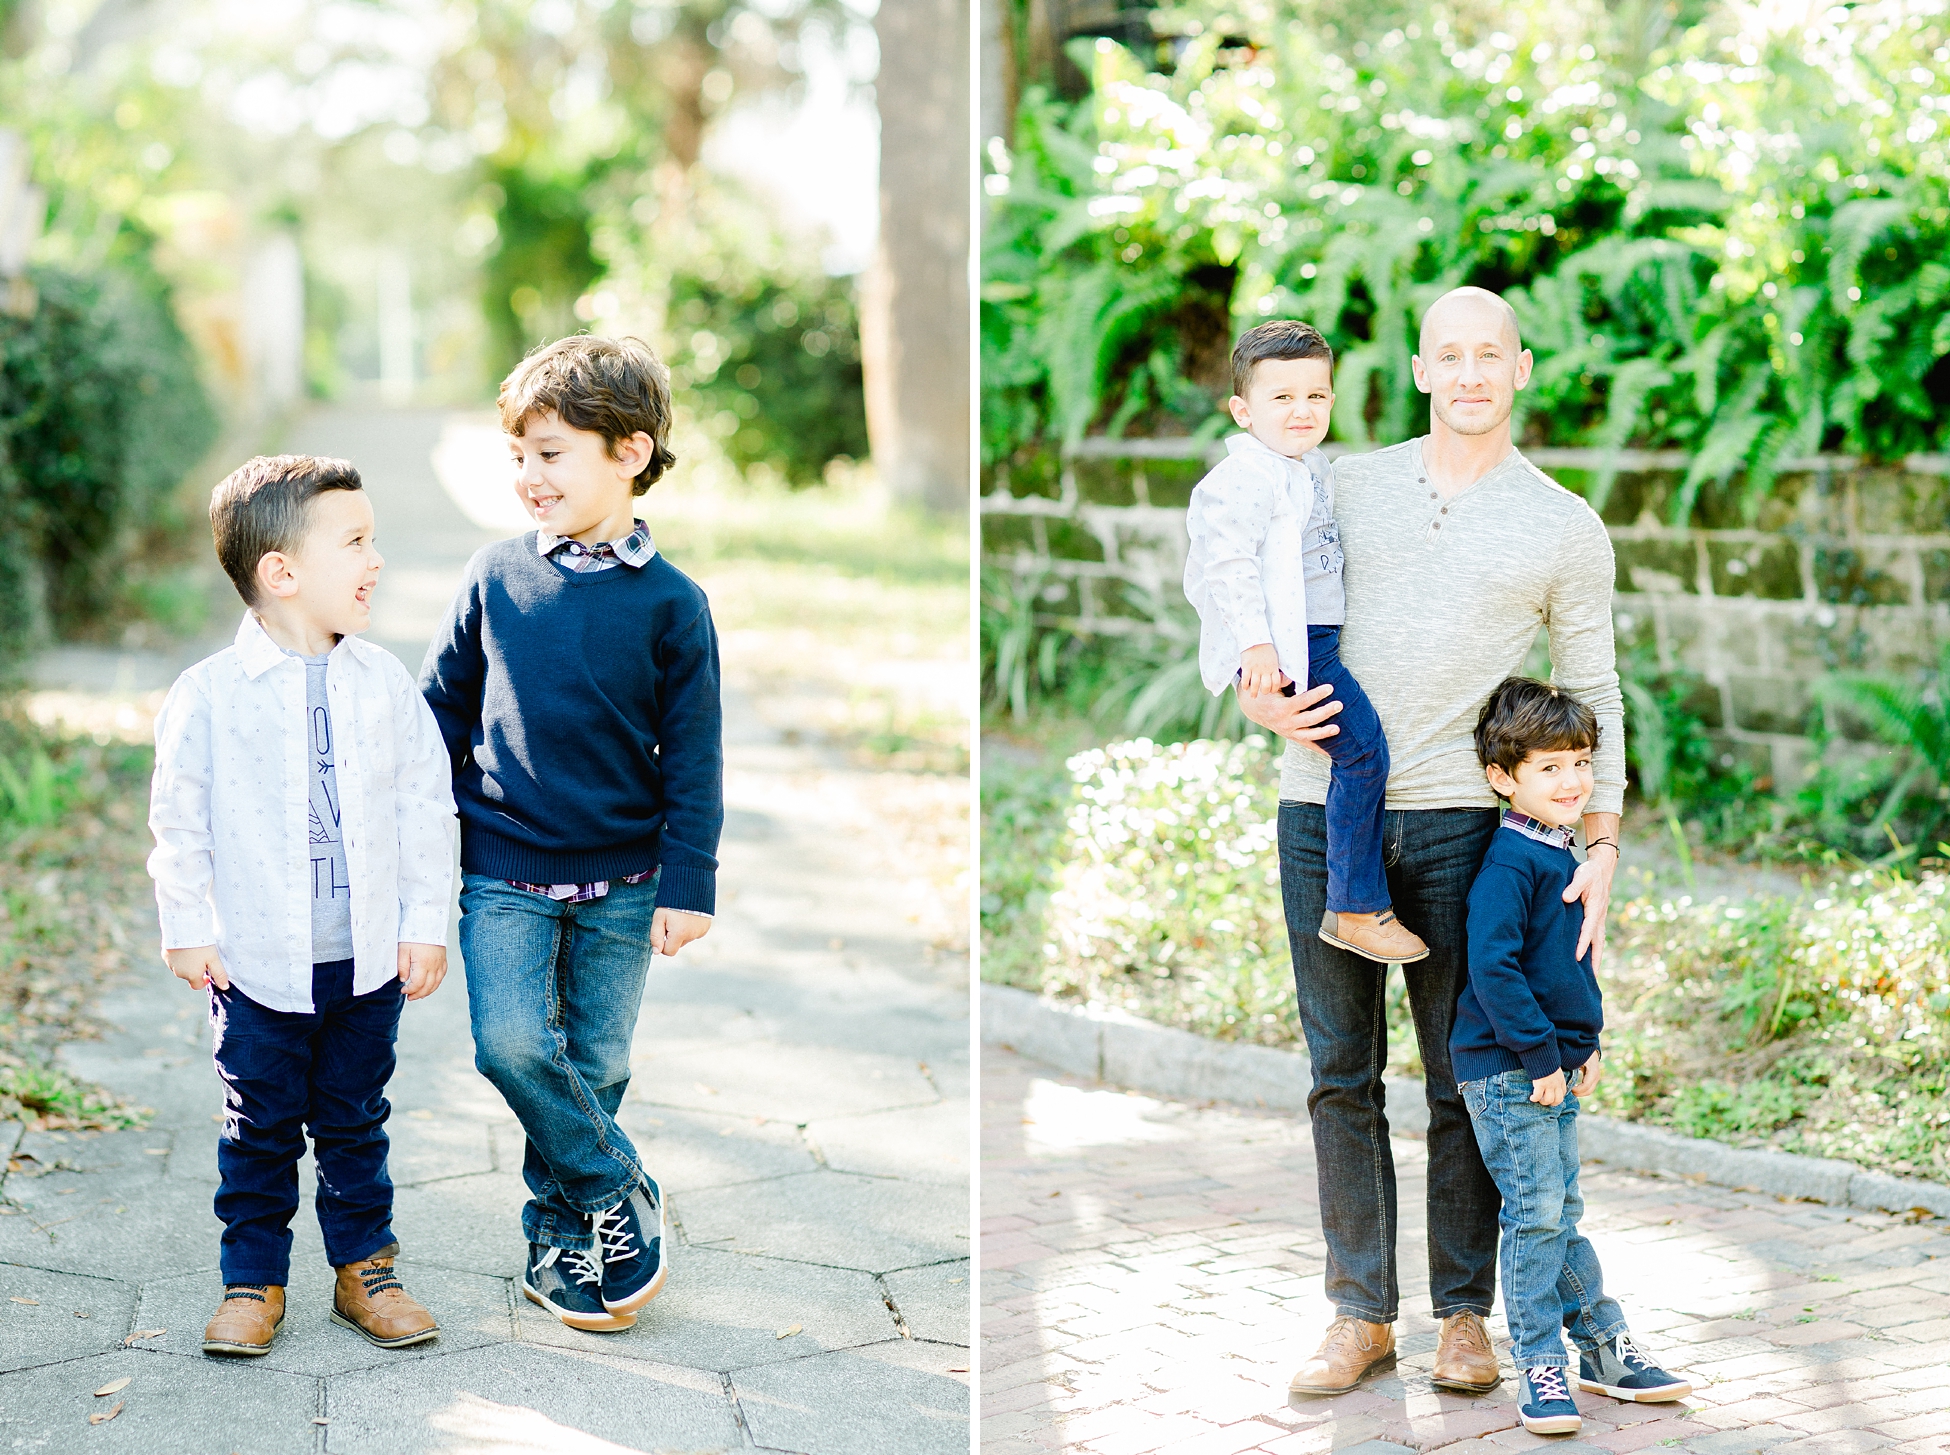 Tampa Family Photographer | © Ailyn La Torre Photography 2019